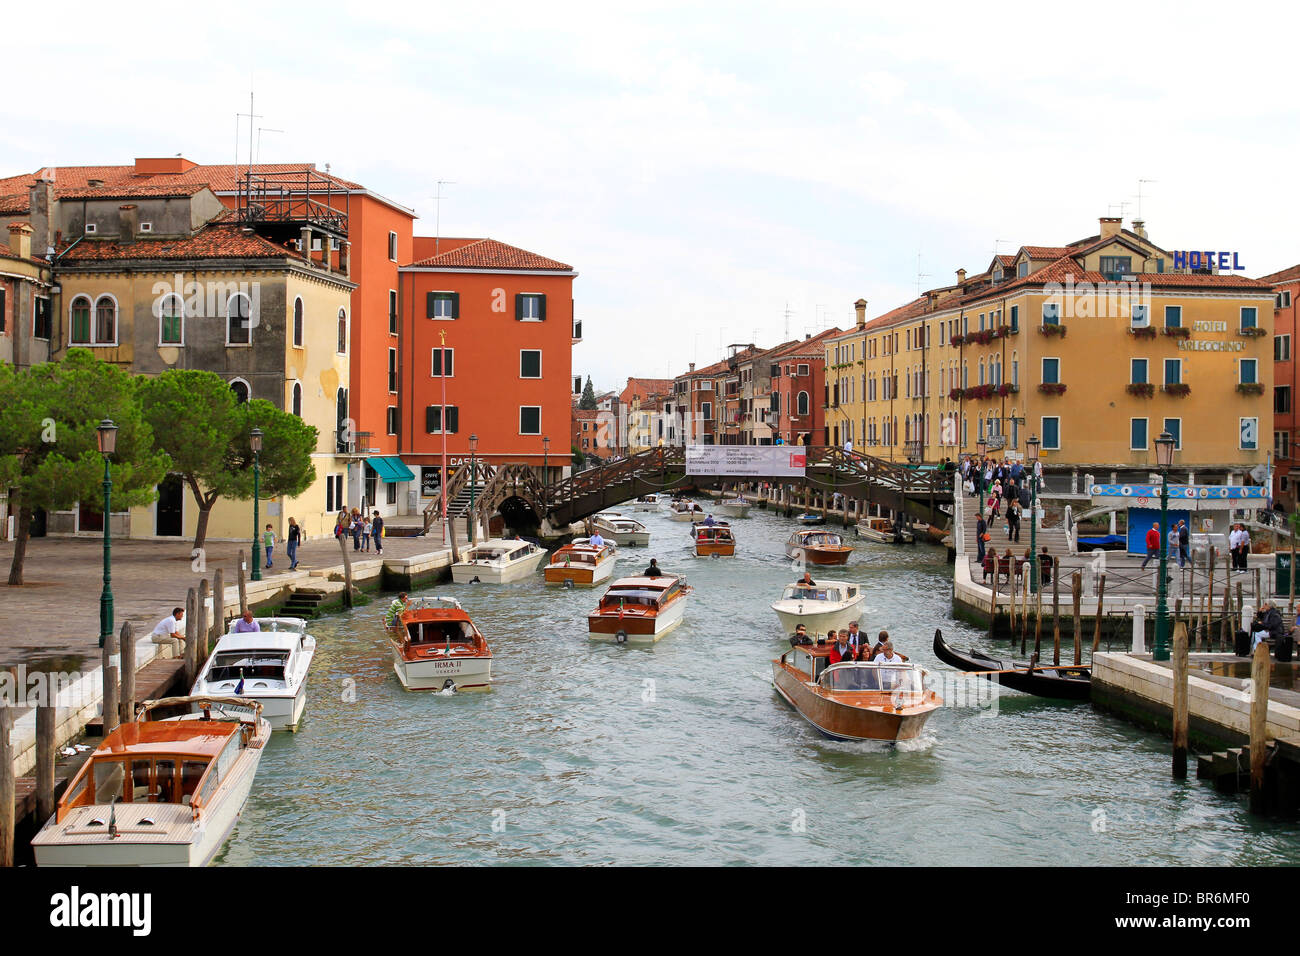 water taxis on the Canale di Santa Chiara, Piazzale Roma, Venice, Italy Stock Photo